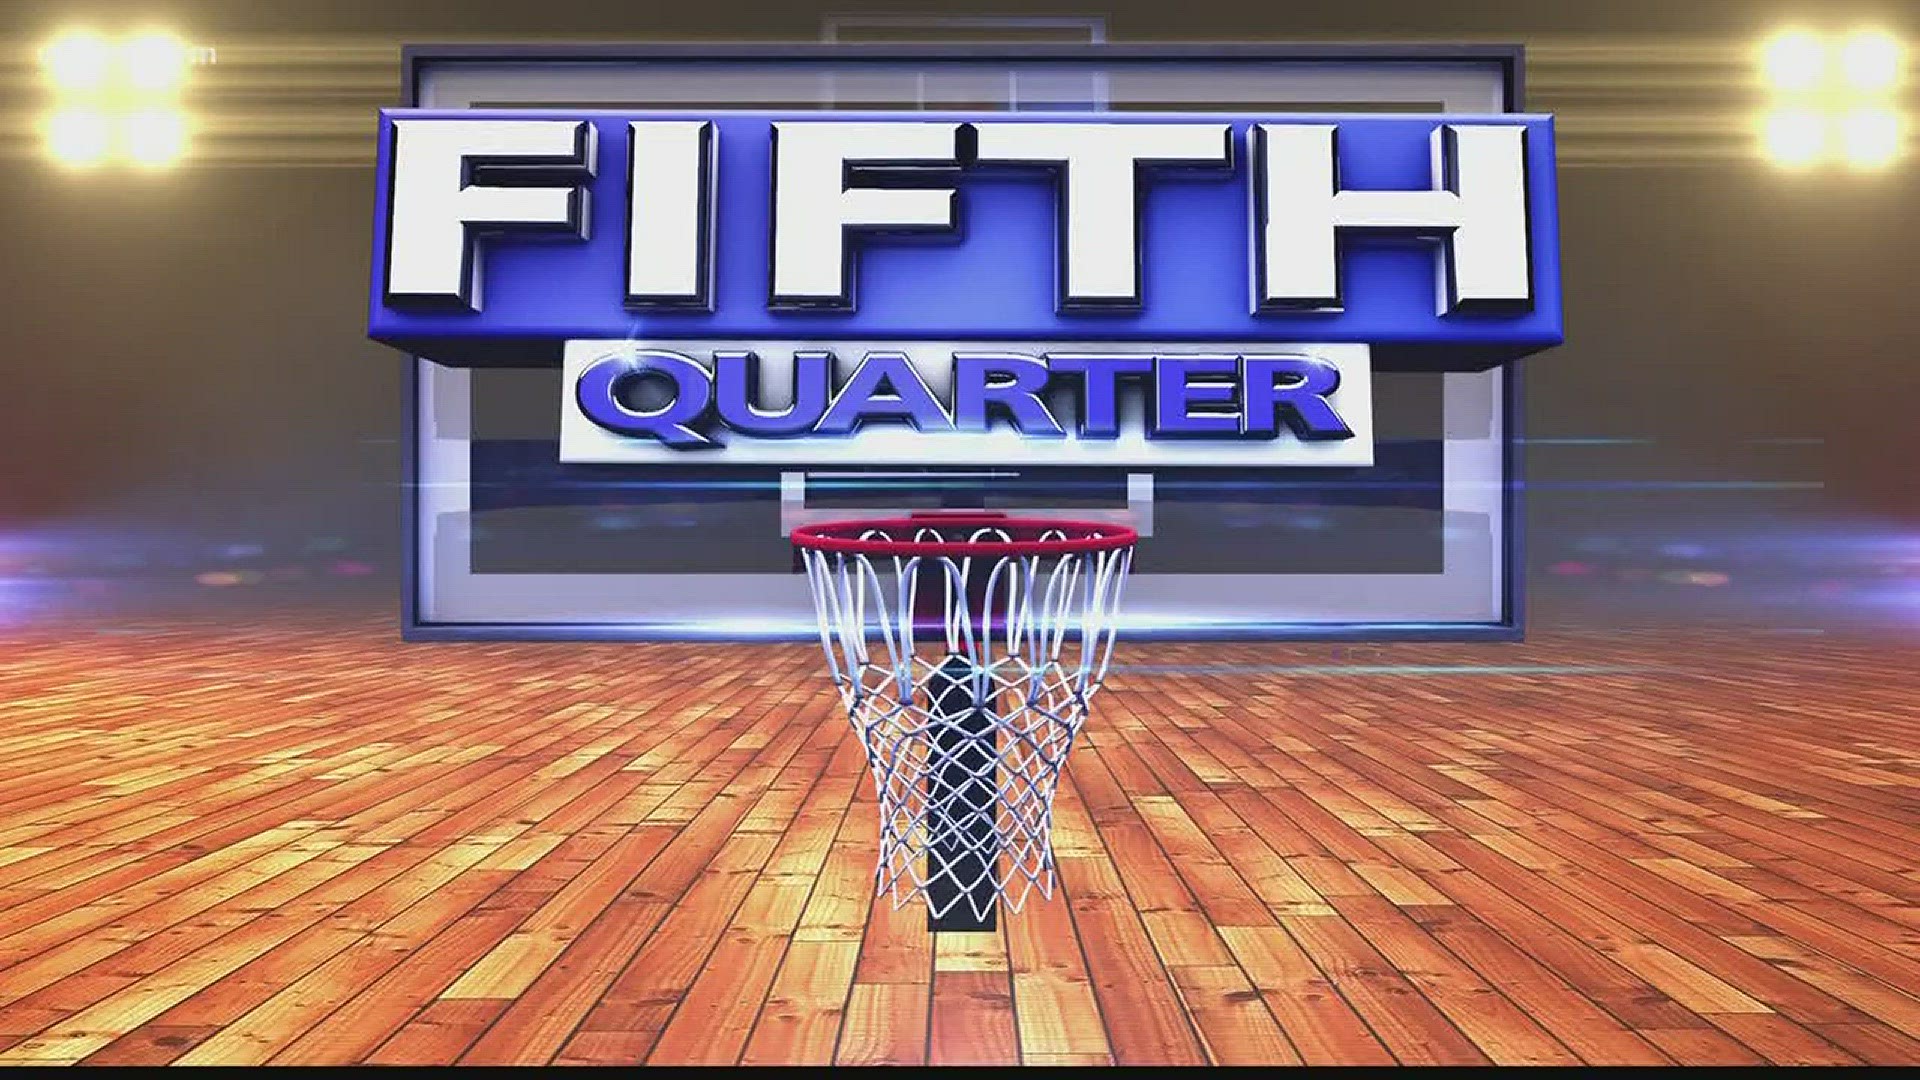 Fifth Quarter basketball is back